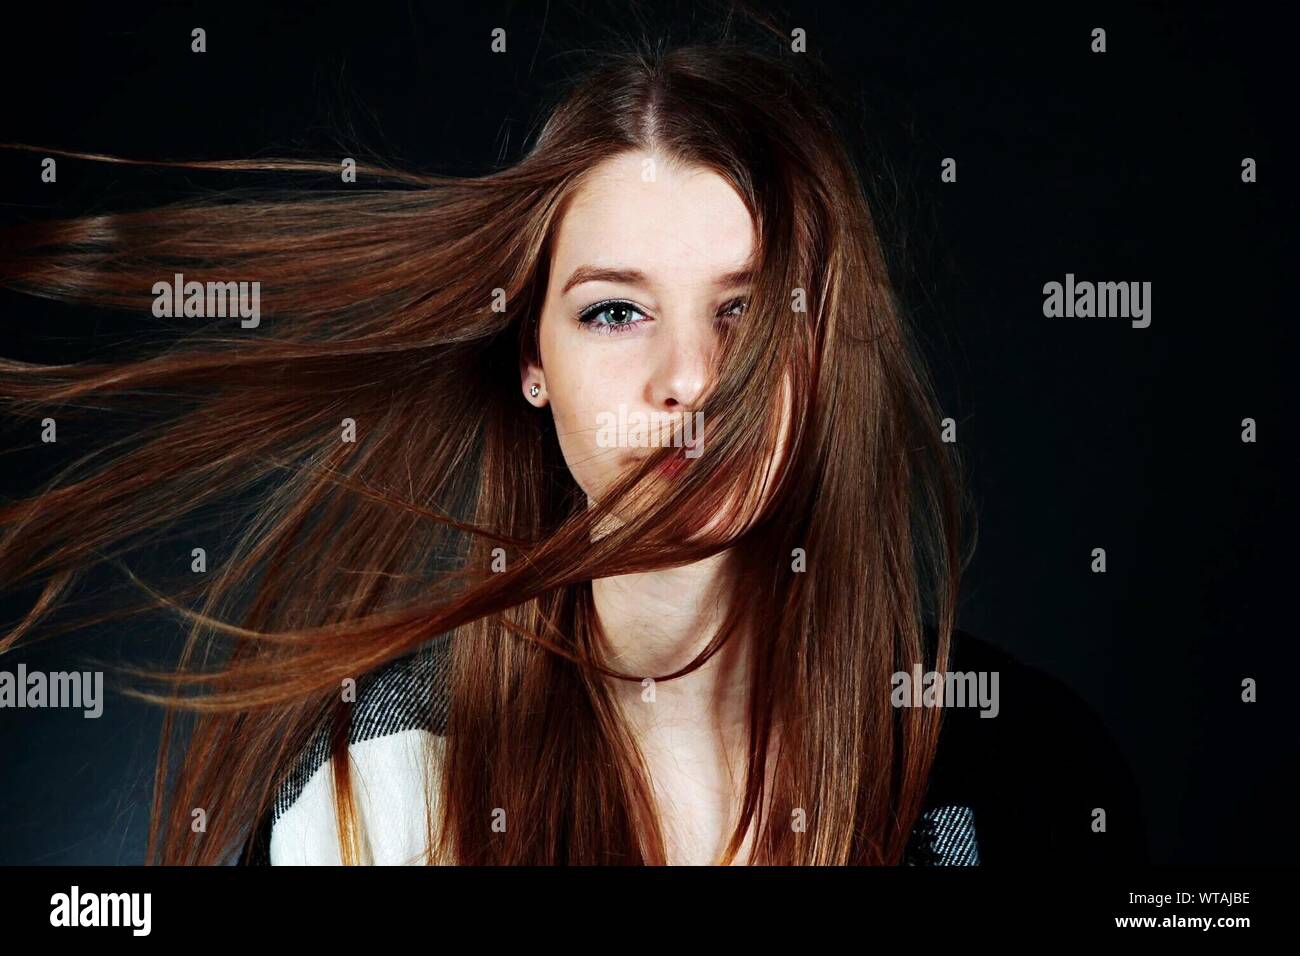 Portrait Of Young Woman With Hair In Face Stock Photo